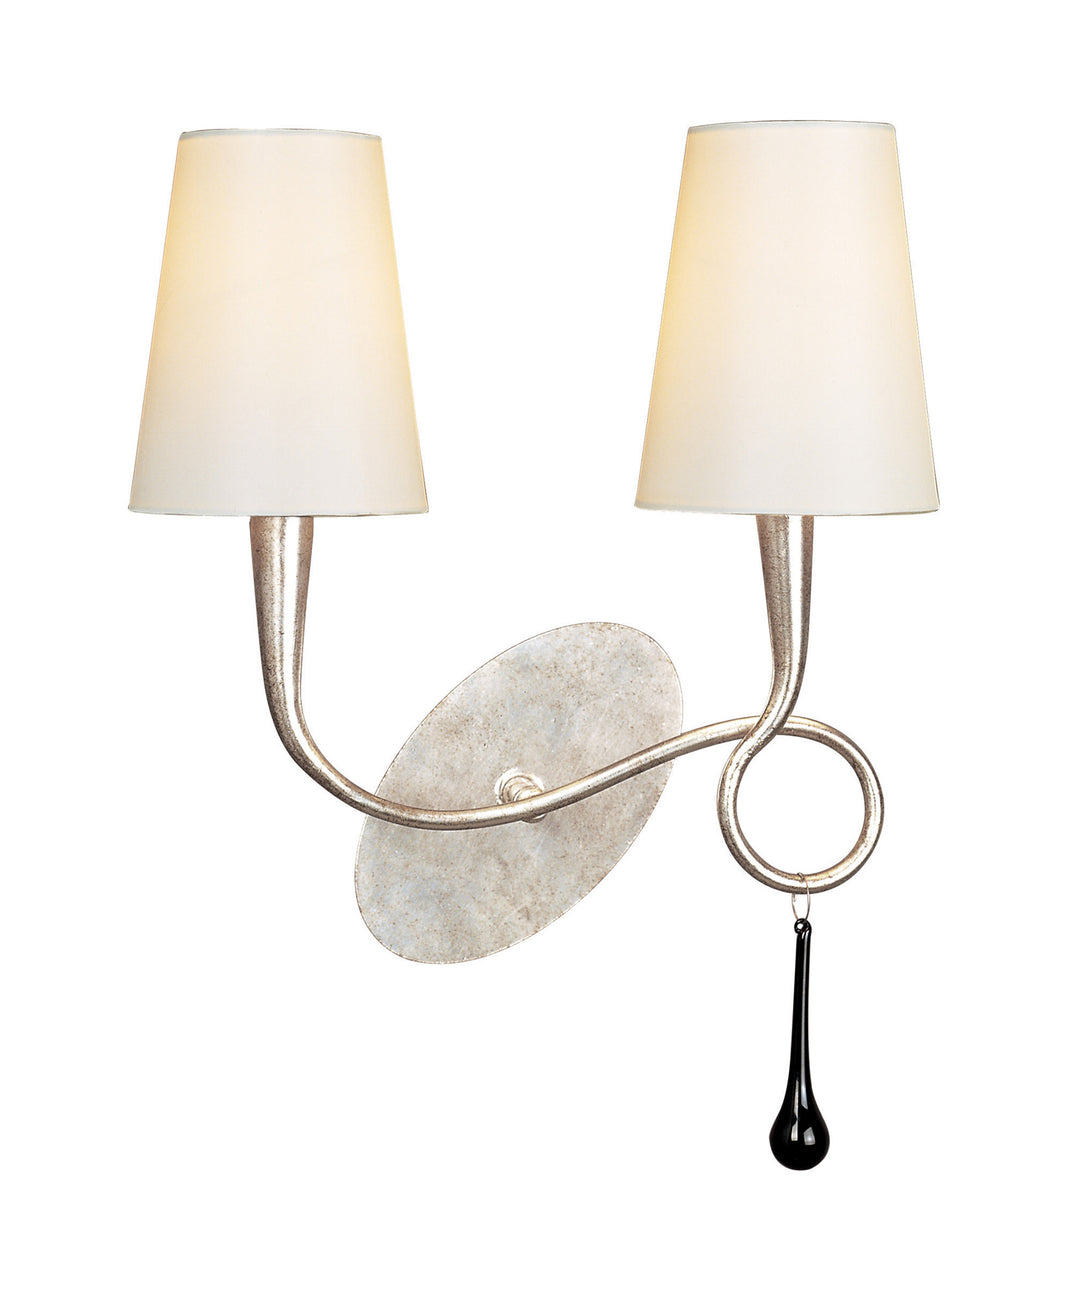 Mantra M0537/S/CS Paola Wall Lamp Switched 2 Light Silver Painted